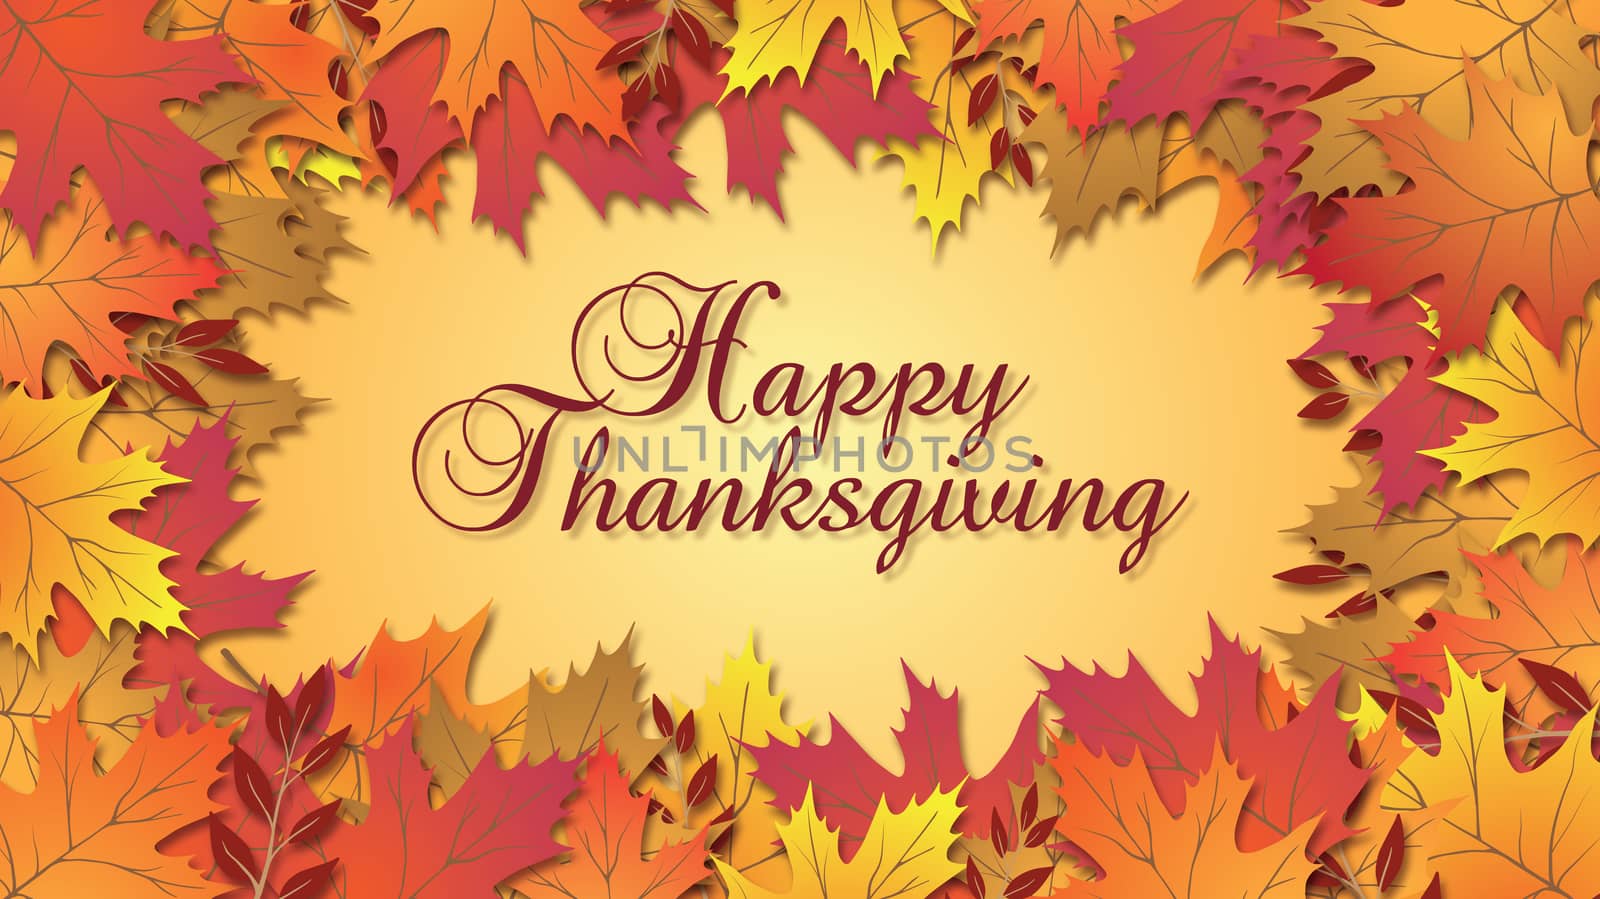 Happy Thanksgiving type with beautiful fall colored leaves